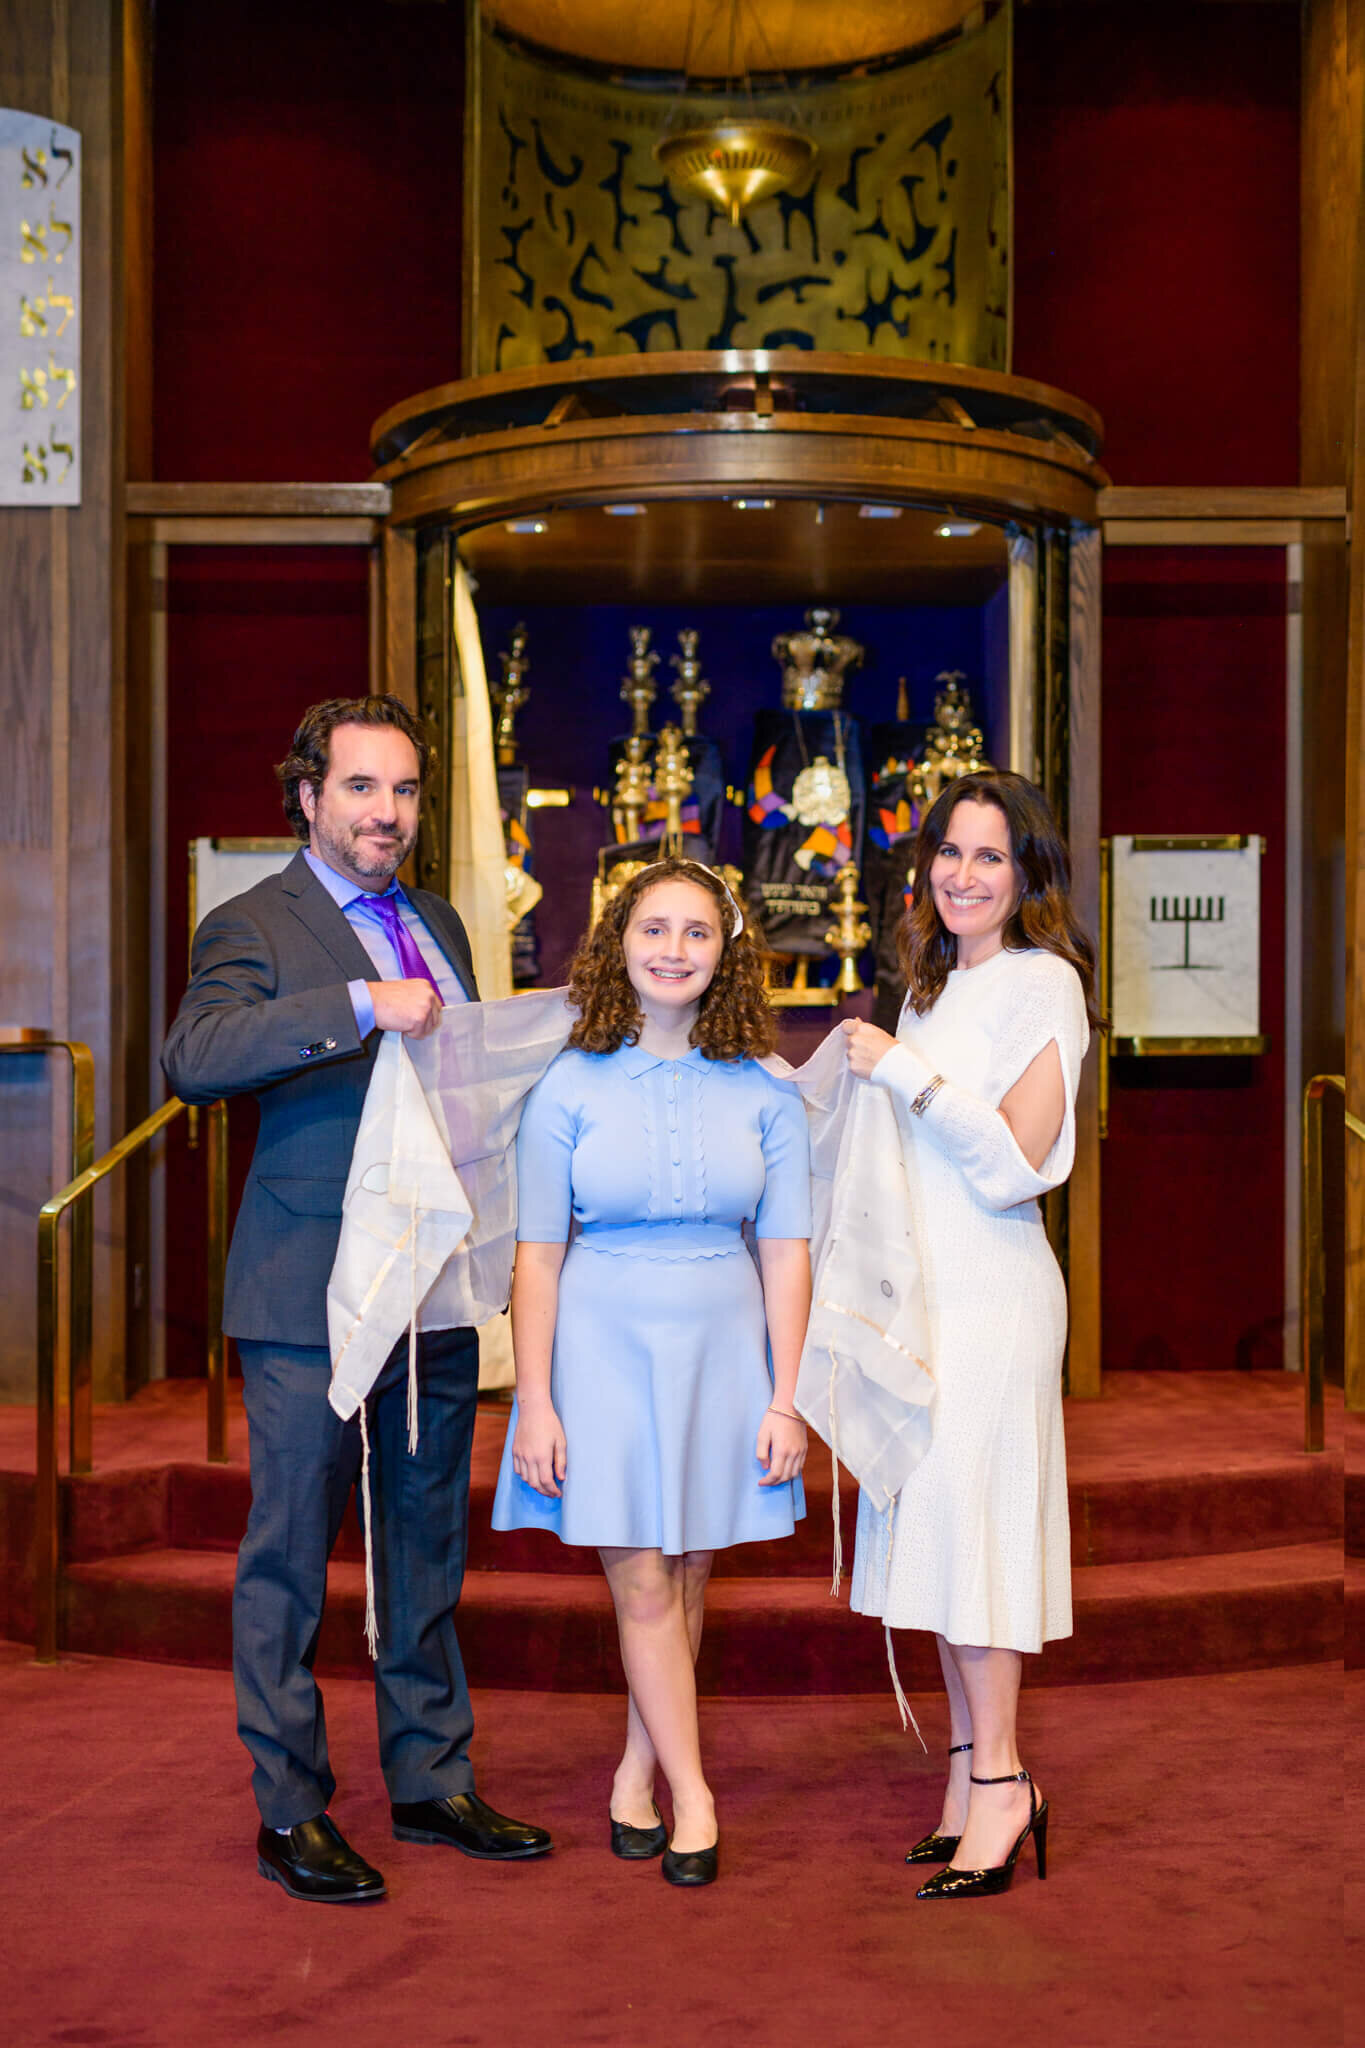 A mom and dad put the tallit on their daughter in the temple during their Bellevue Bar and Bat Mitzvah Photography session